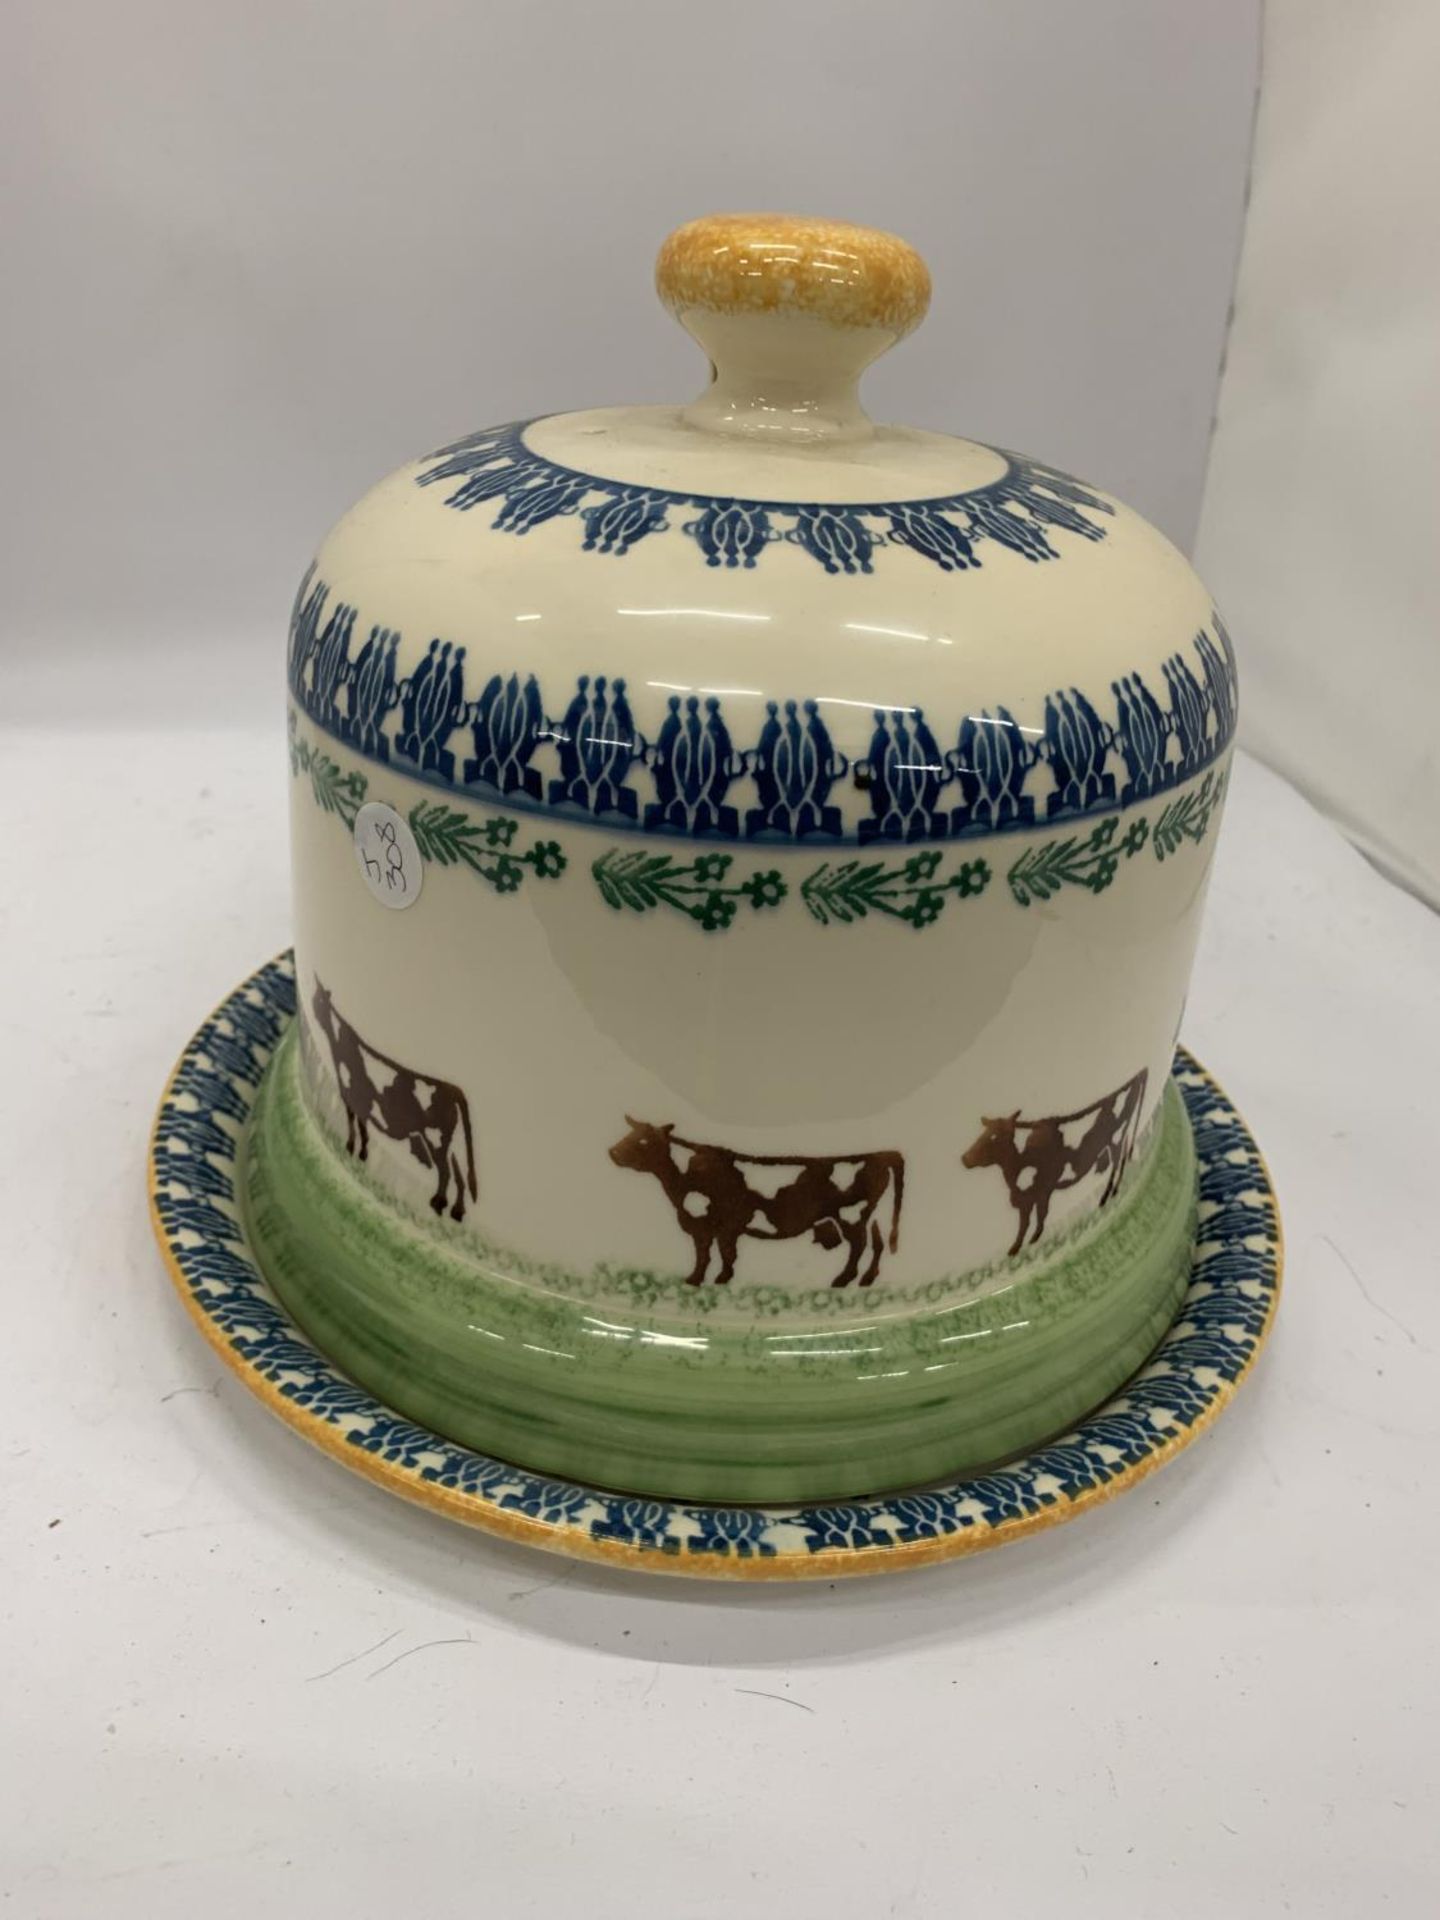 A LARGE MOORLAND POTTERY CHEESE PLATE AND DOME WITH COW DECORATION - Image 2 of 6